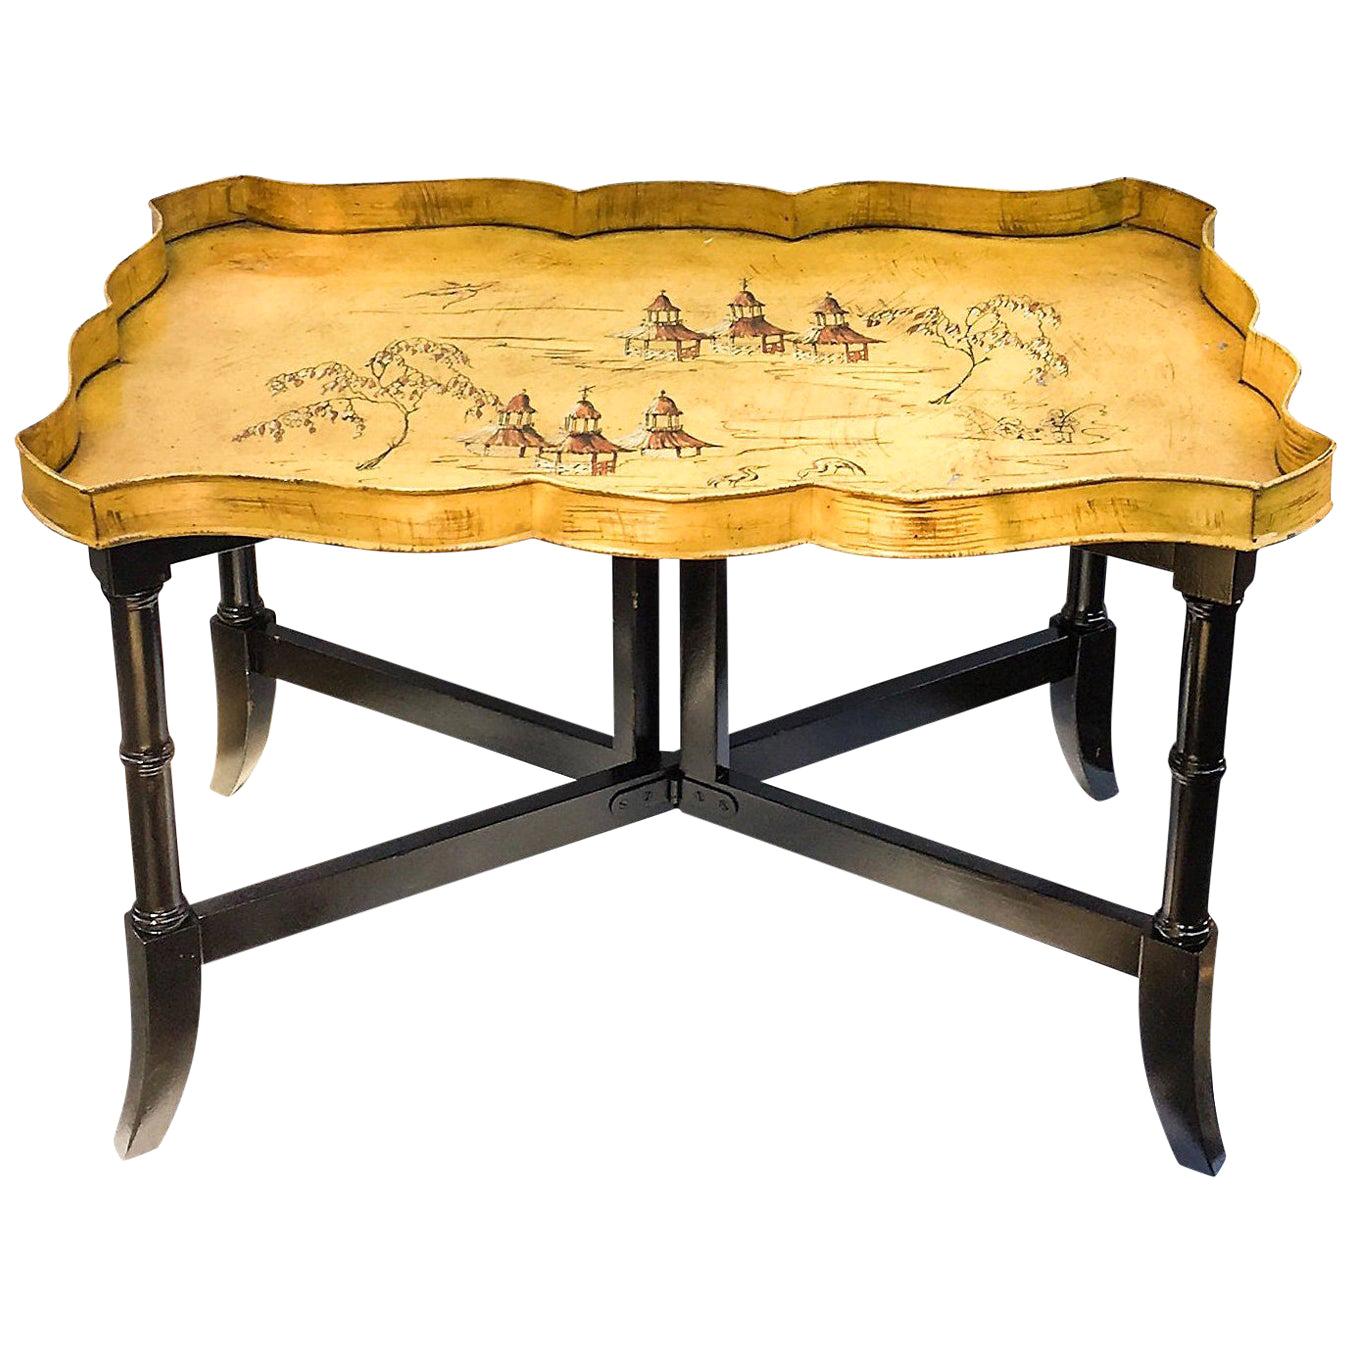 Italian Tole Chinoiserie Pagoda Tray Table on Faux Bamboo Base, 1950s For Sale